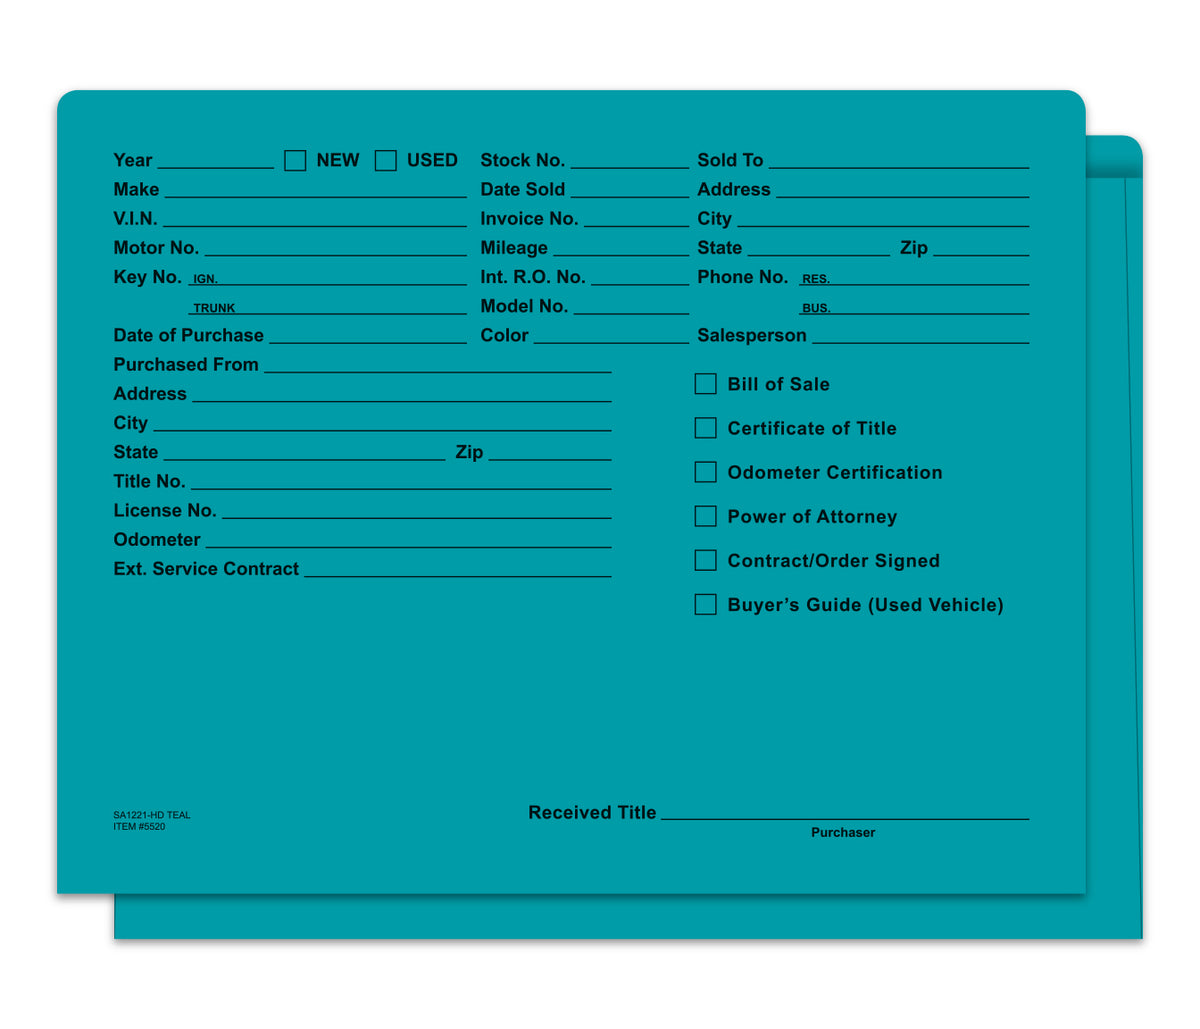 Heavy Duty Deal Envelopes Printed in Teal; image is a teal-colored deal envelope with black writing on it. www.flywheelnw.com